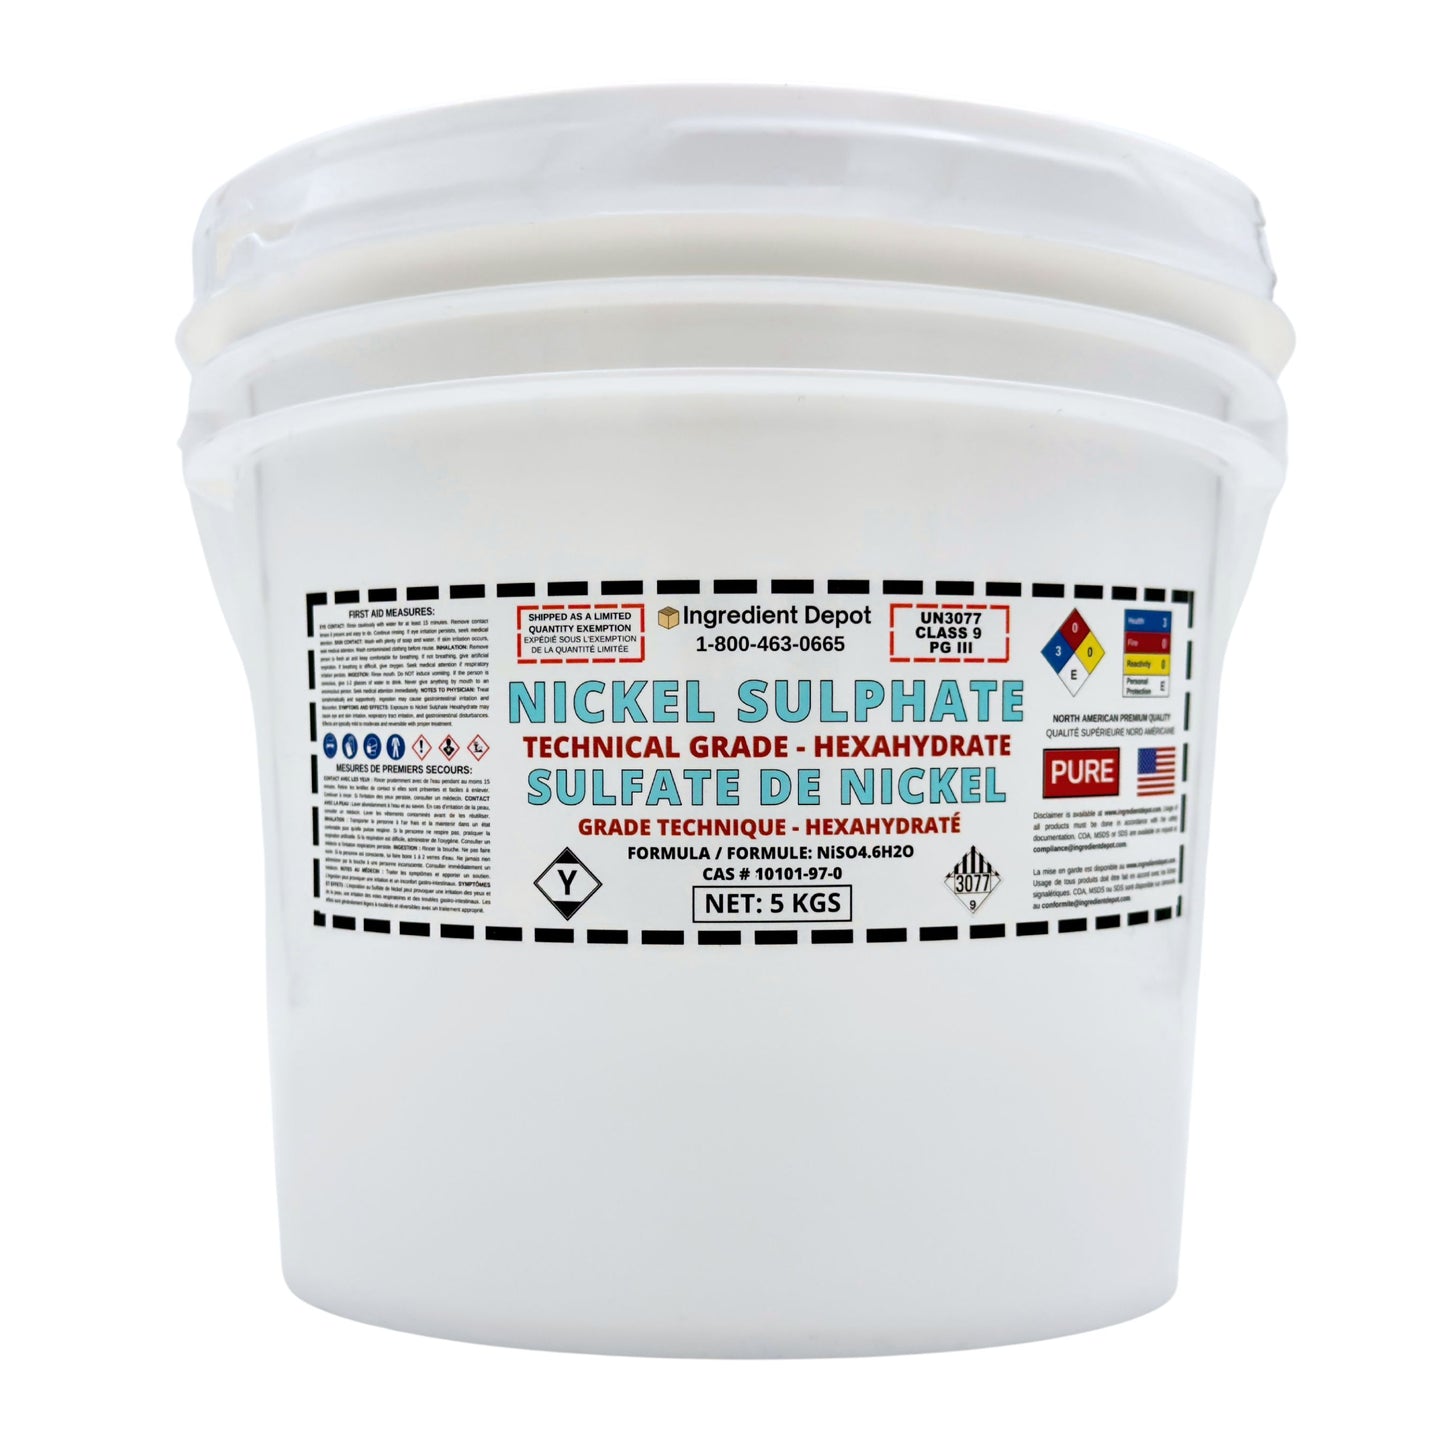 Nickel Sulphate (Sulfate) Hexahydrate